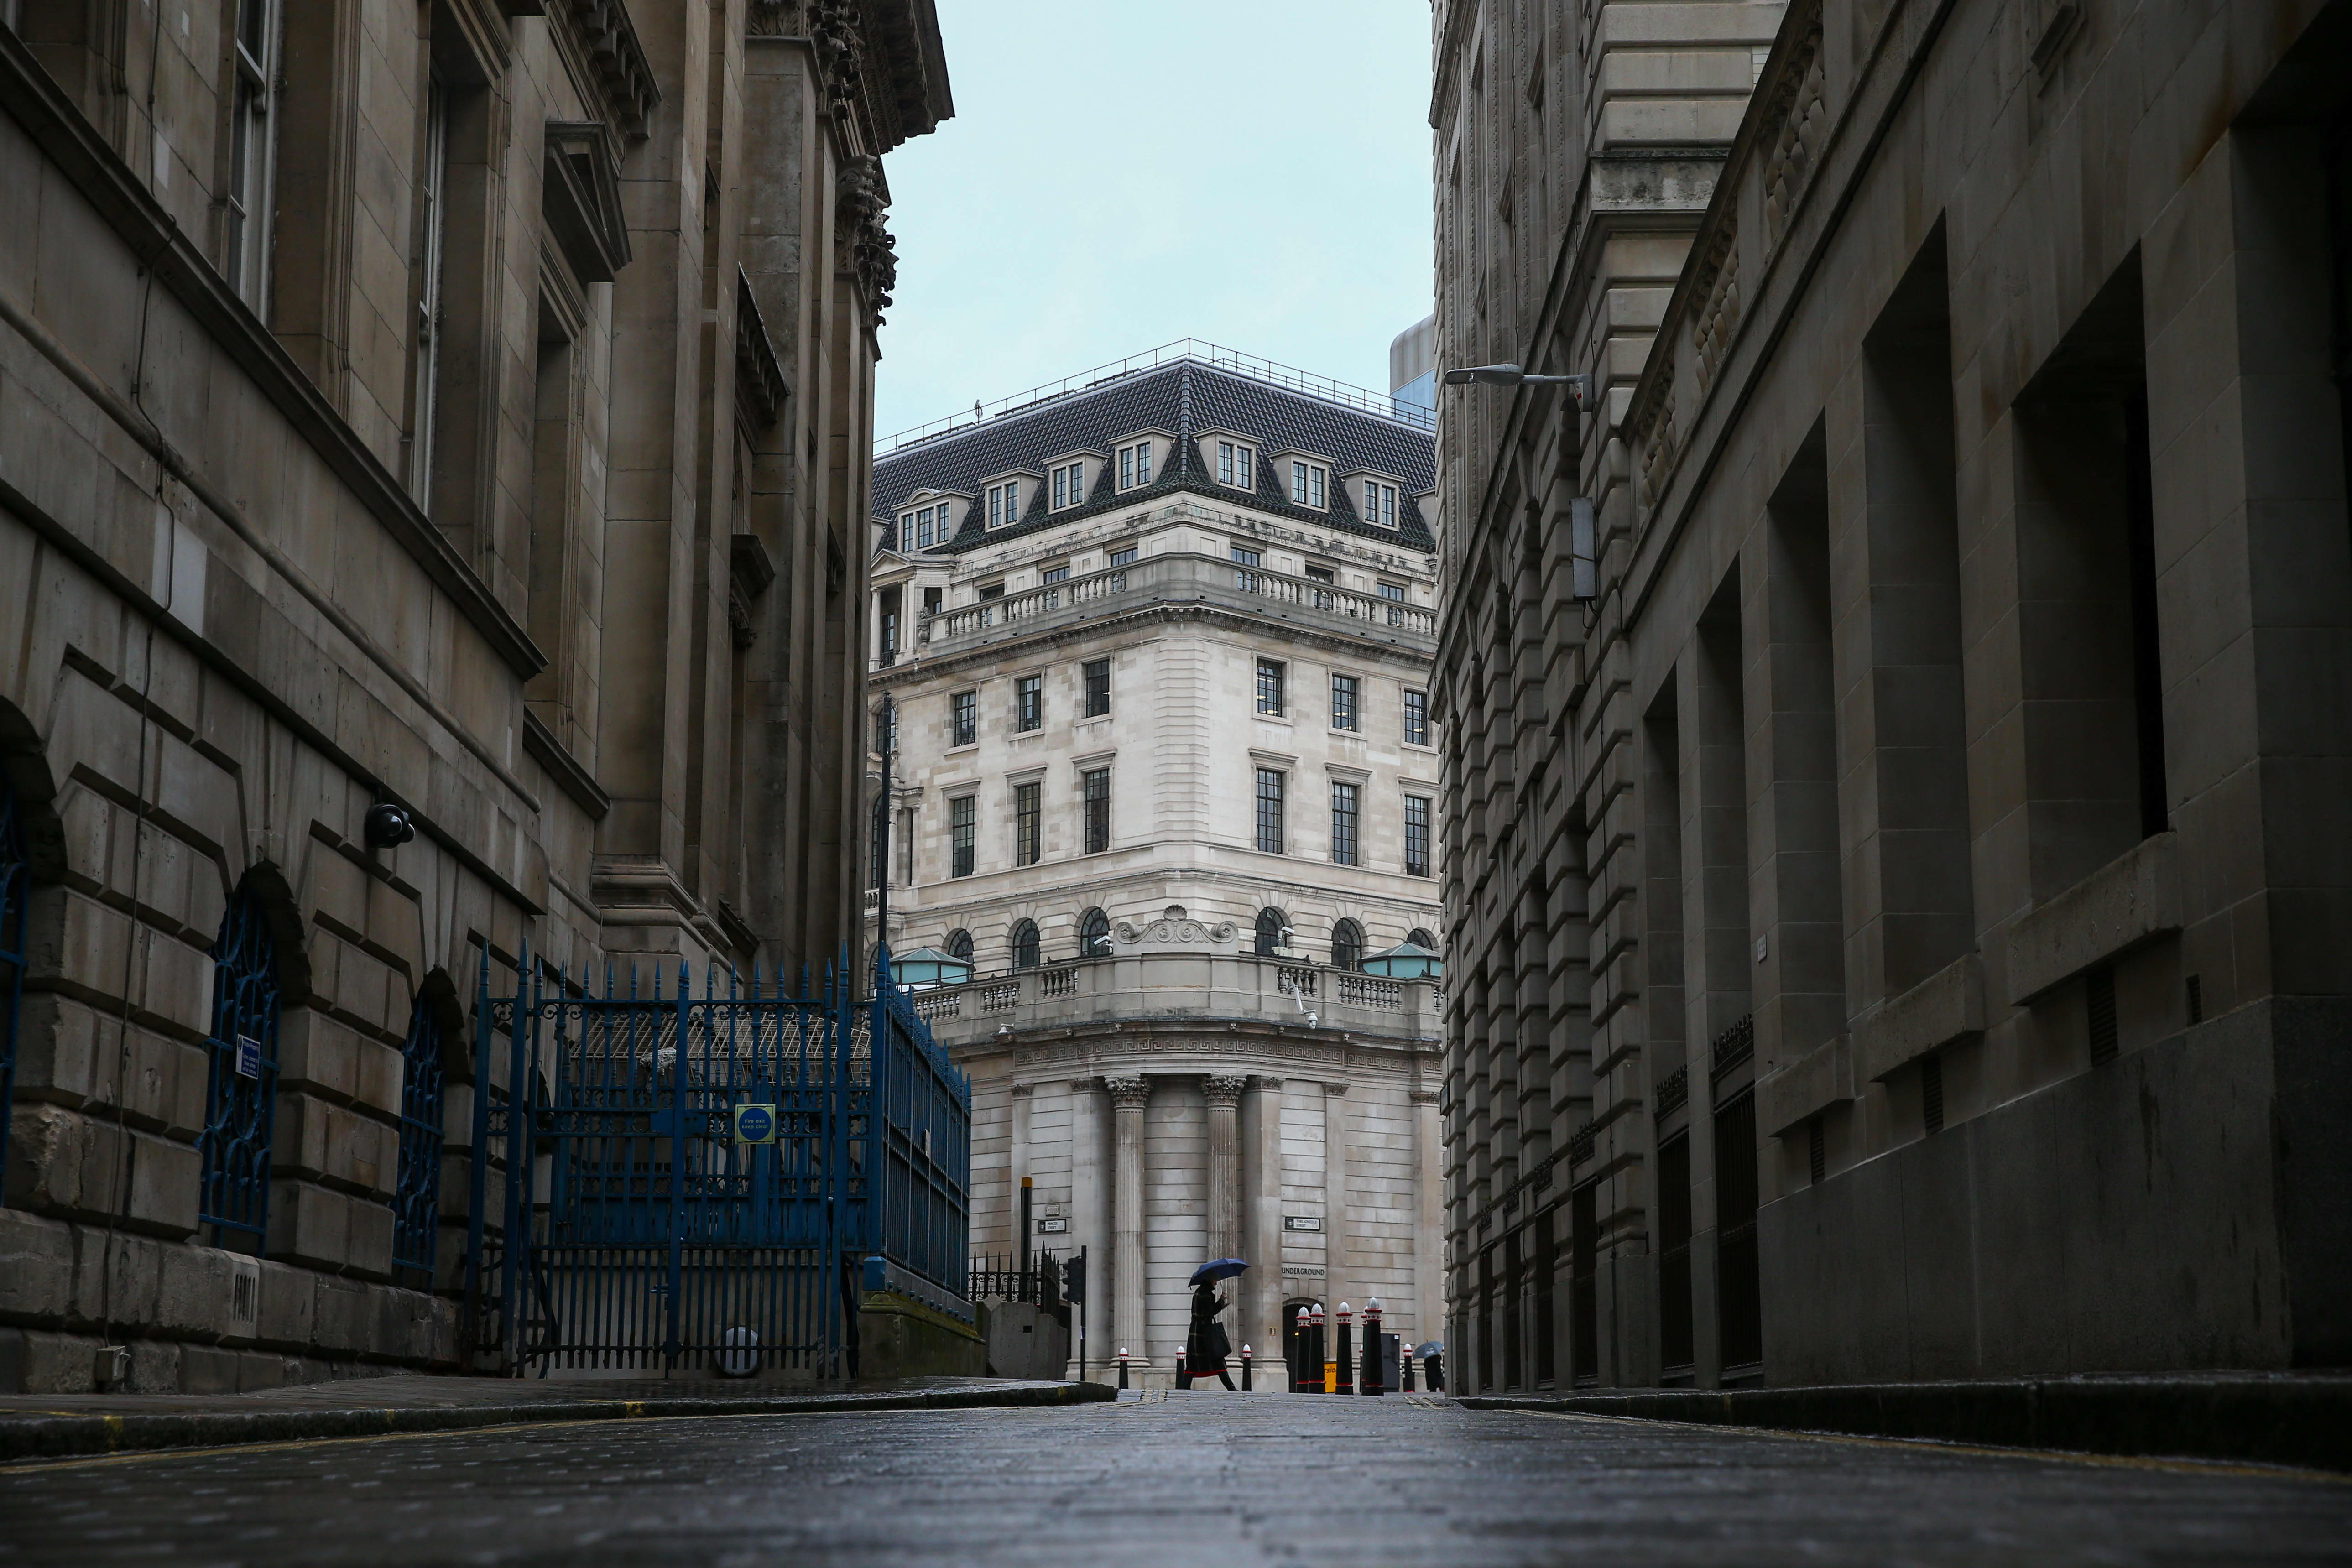 The Bank of England raised interest rates by 25 basis points after inflation surprises